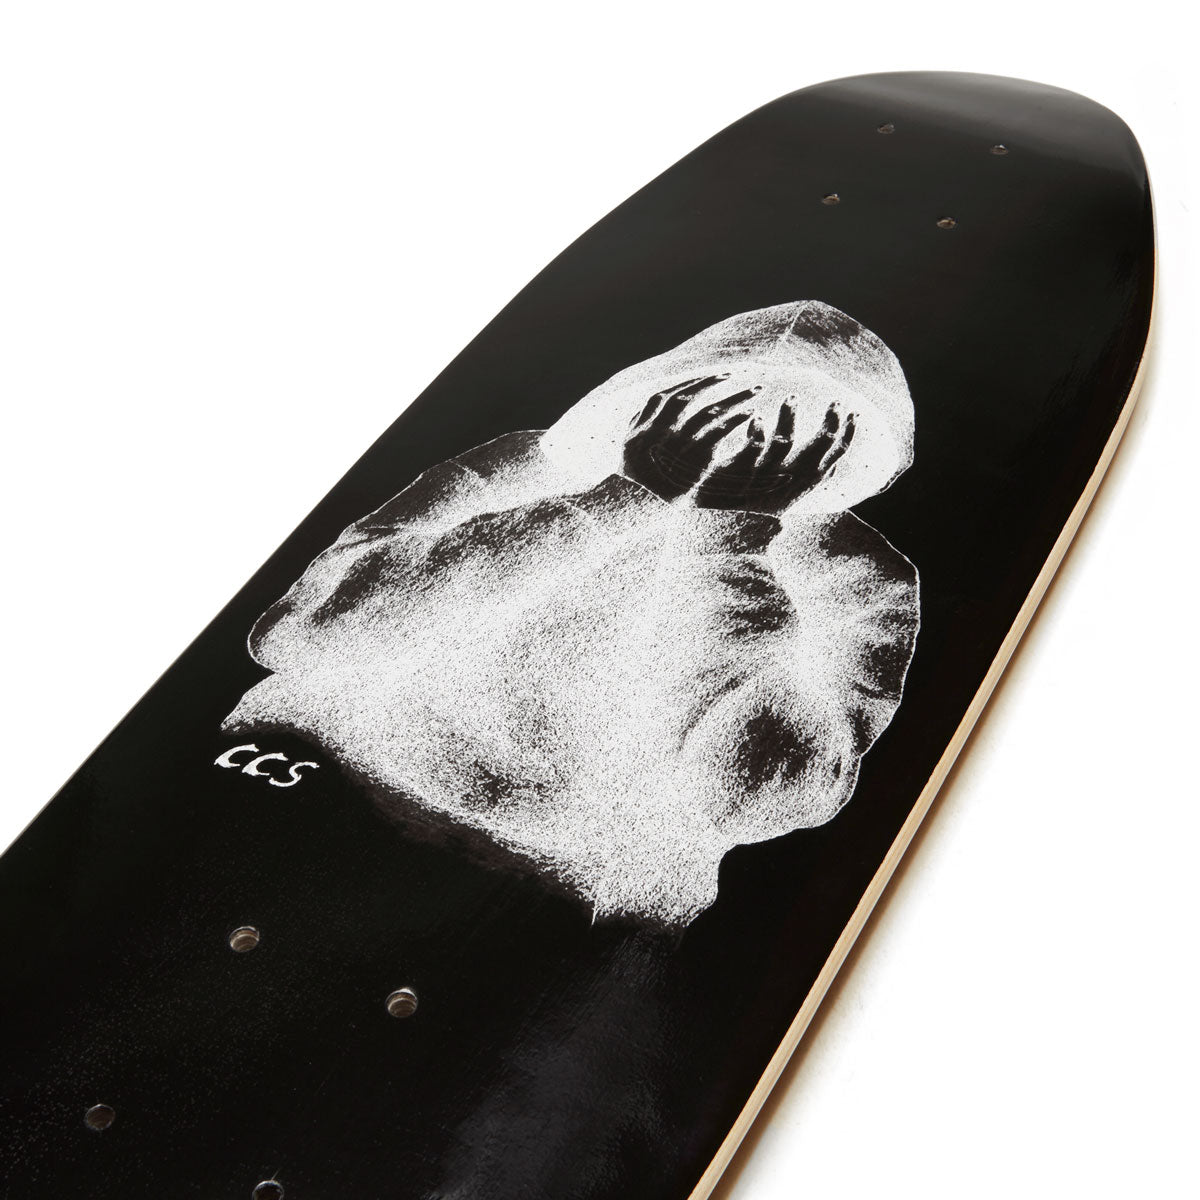 CCS Smile on The Surface Crusier Skateboard Complete - Black image 3